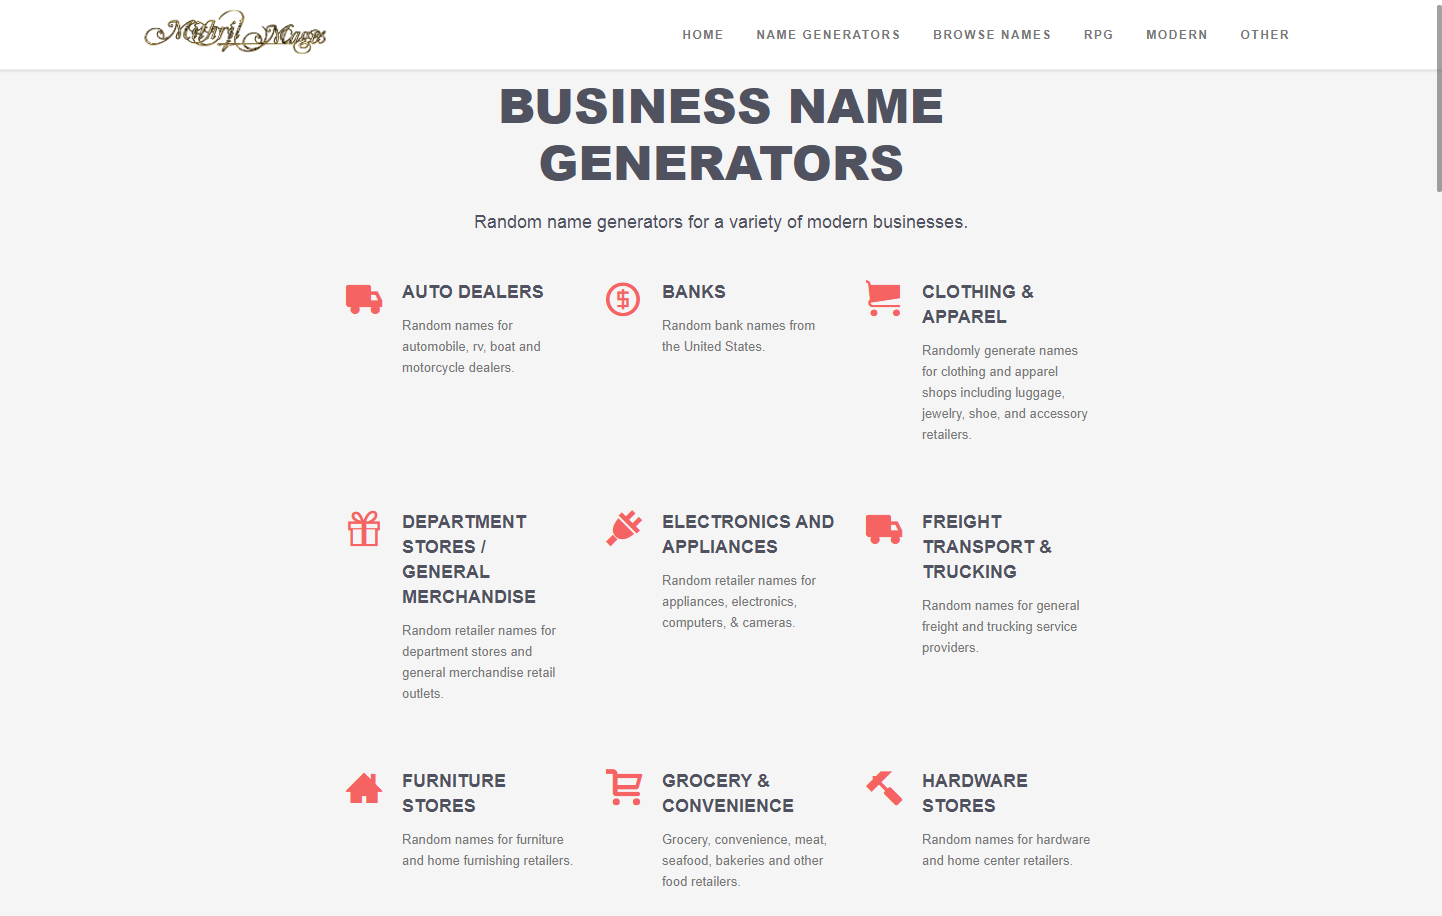 mithril-and-mages-business-name-generators